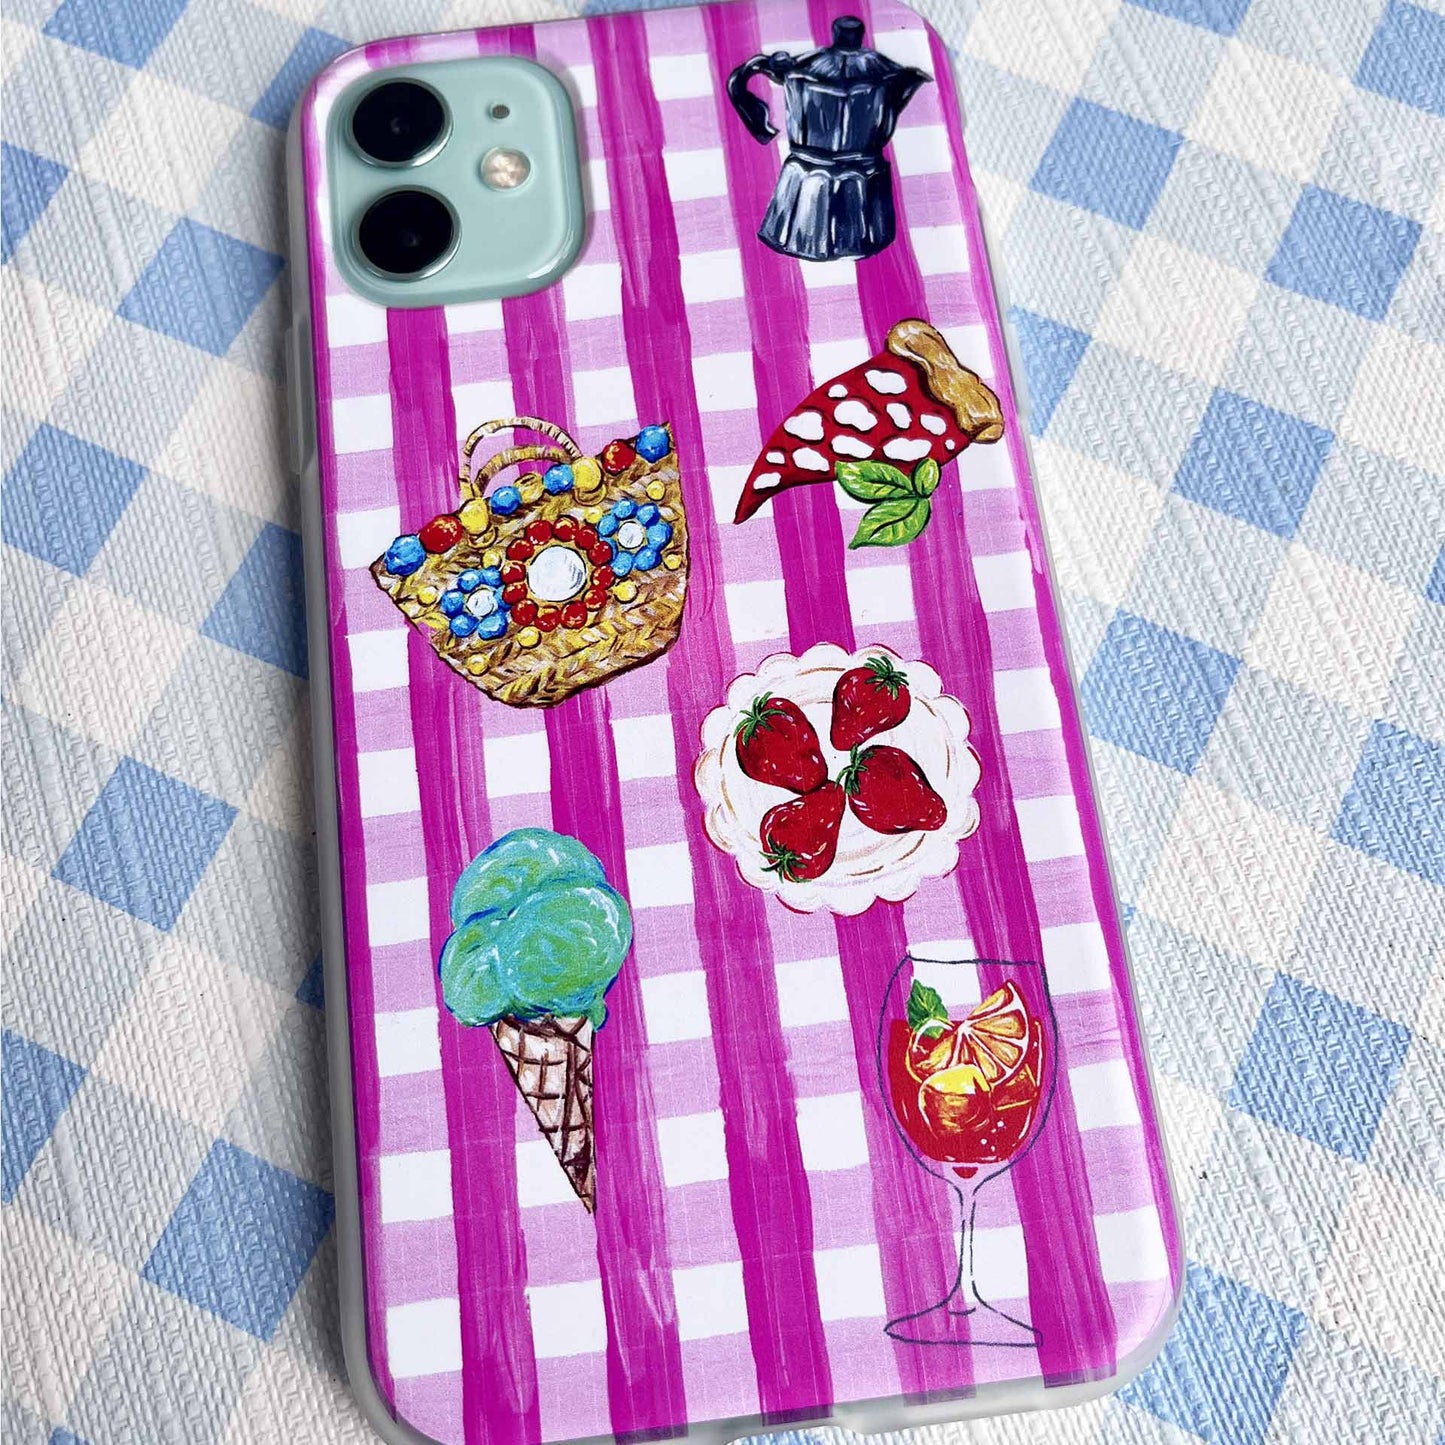 Pink Gingham Vichy Phone Cover featuring Italian icons